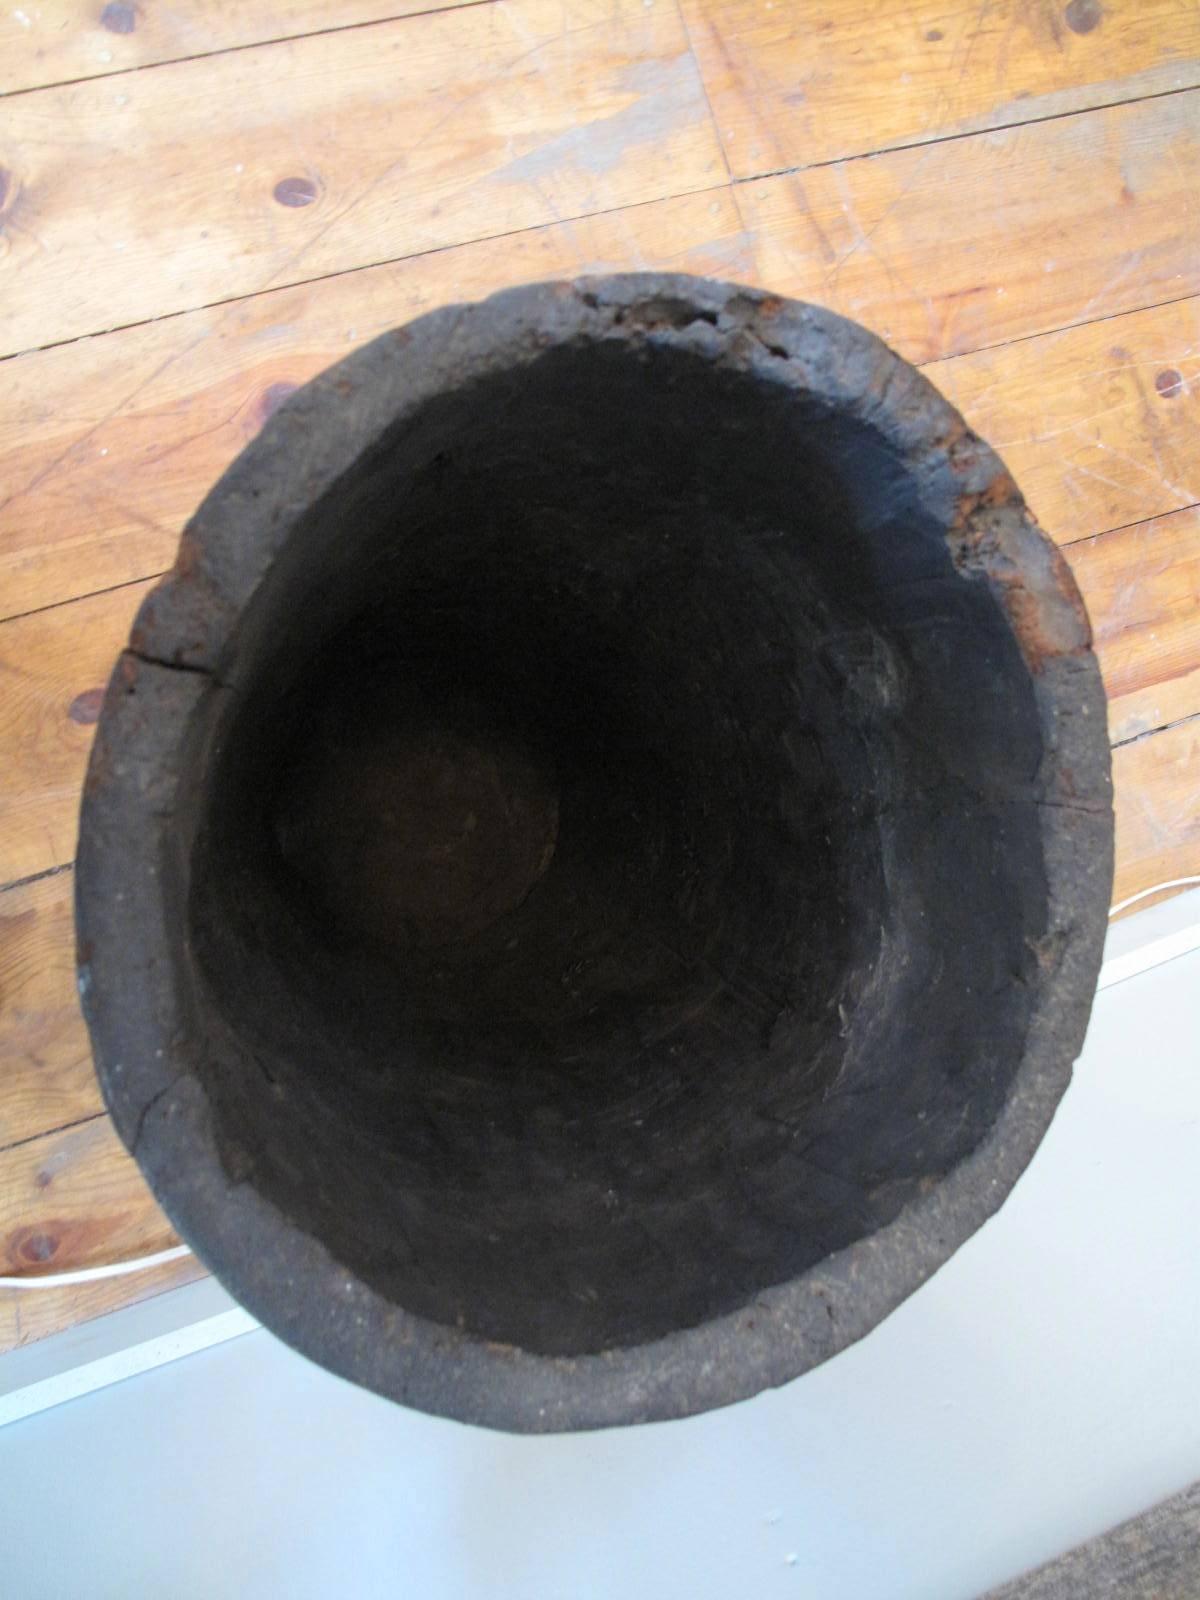 Hollowed timber cylinder, with attached plank bottom. Shows honest age and use.